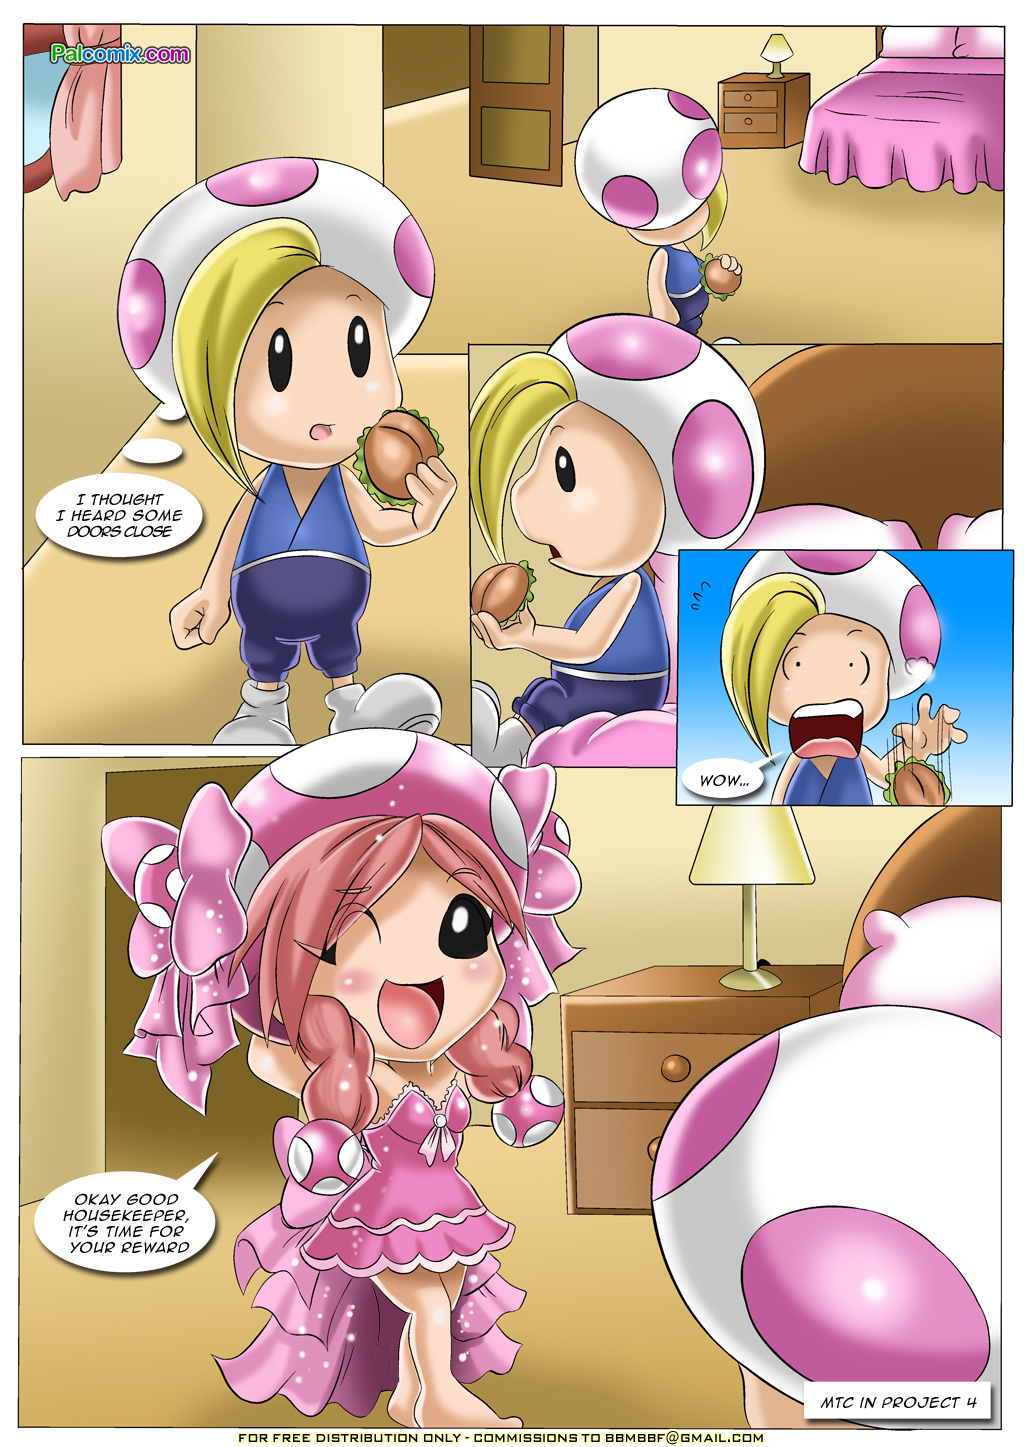 Mario-Project-3-page32-MTC-IN-PROJECT-4--Gotofap.tk--65004025.jpg 